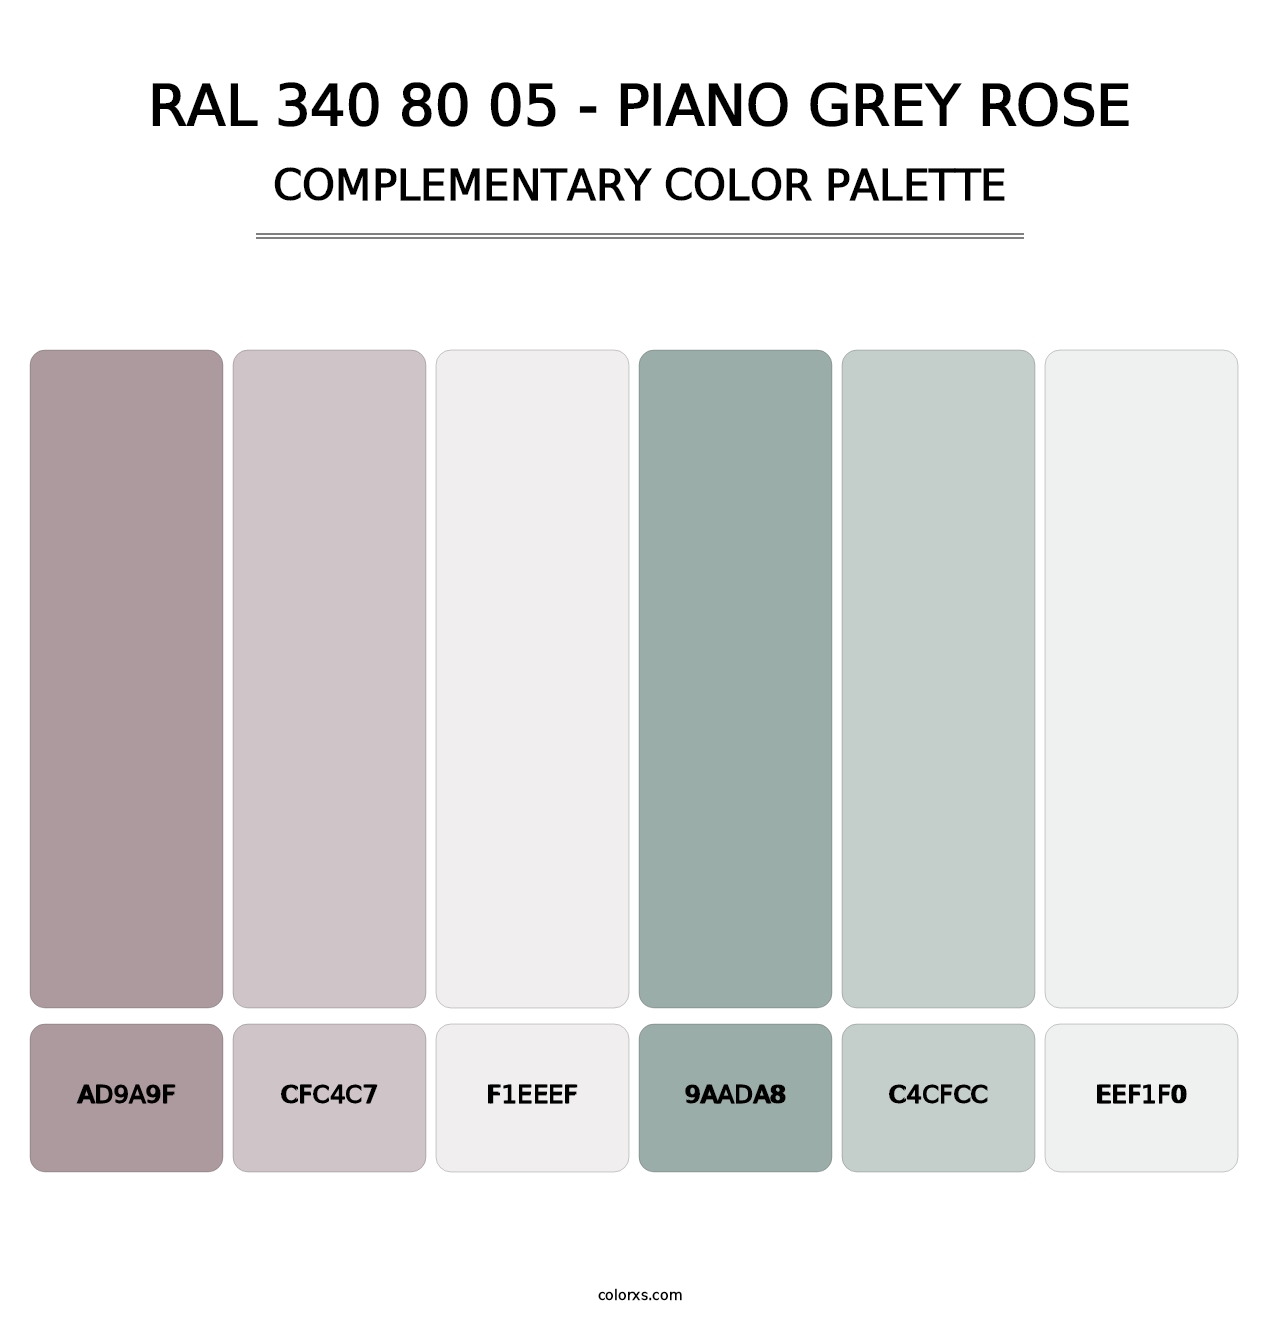 RAL 340 80 05 - Piano Grey Rose - Complementary Color Palette